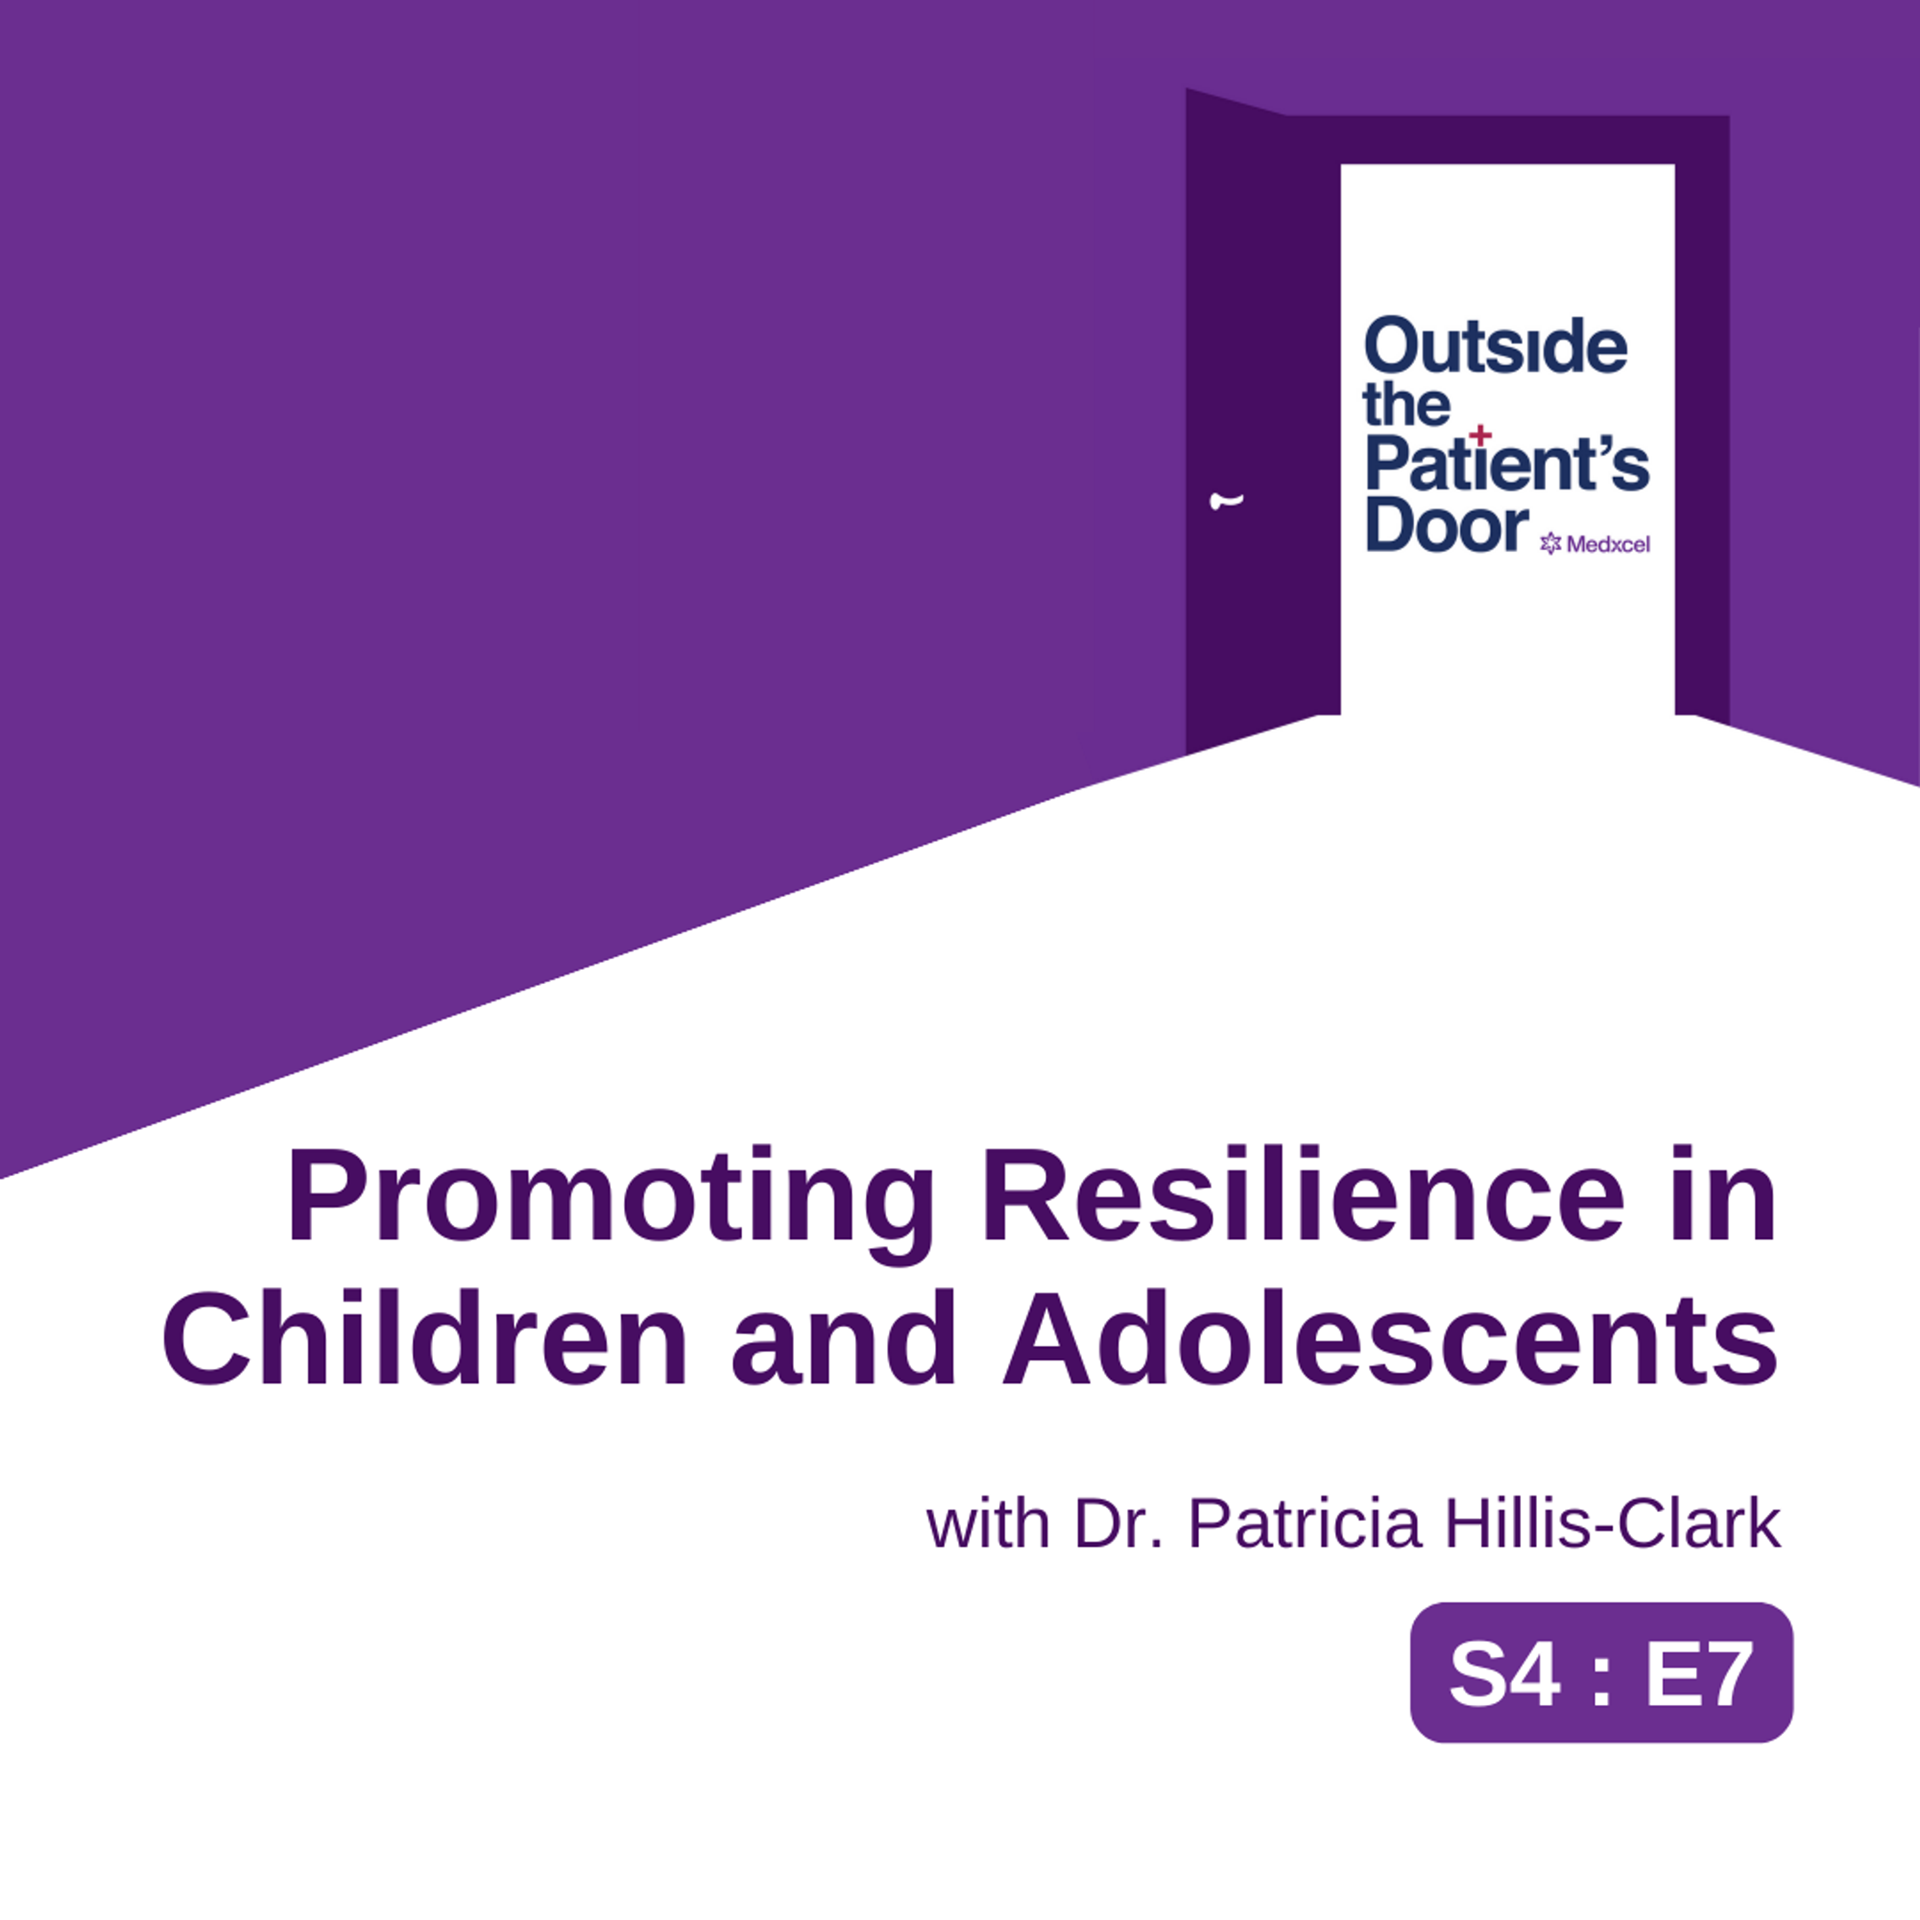 S4 E7: Promoting Resilience in Children and Adolescents with Dr. Patricia Hillis-Clark